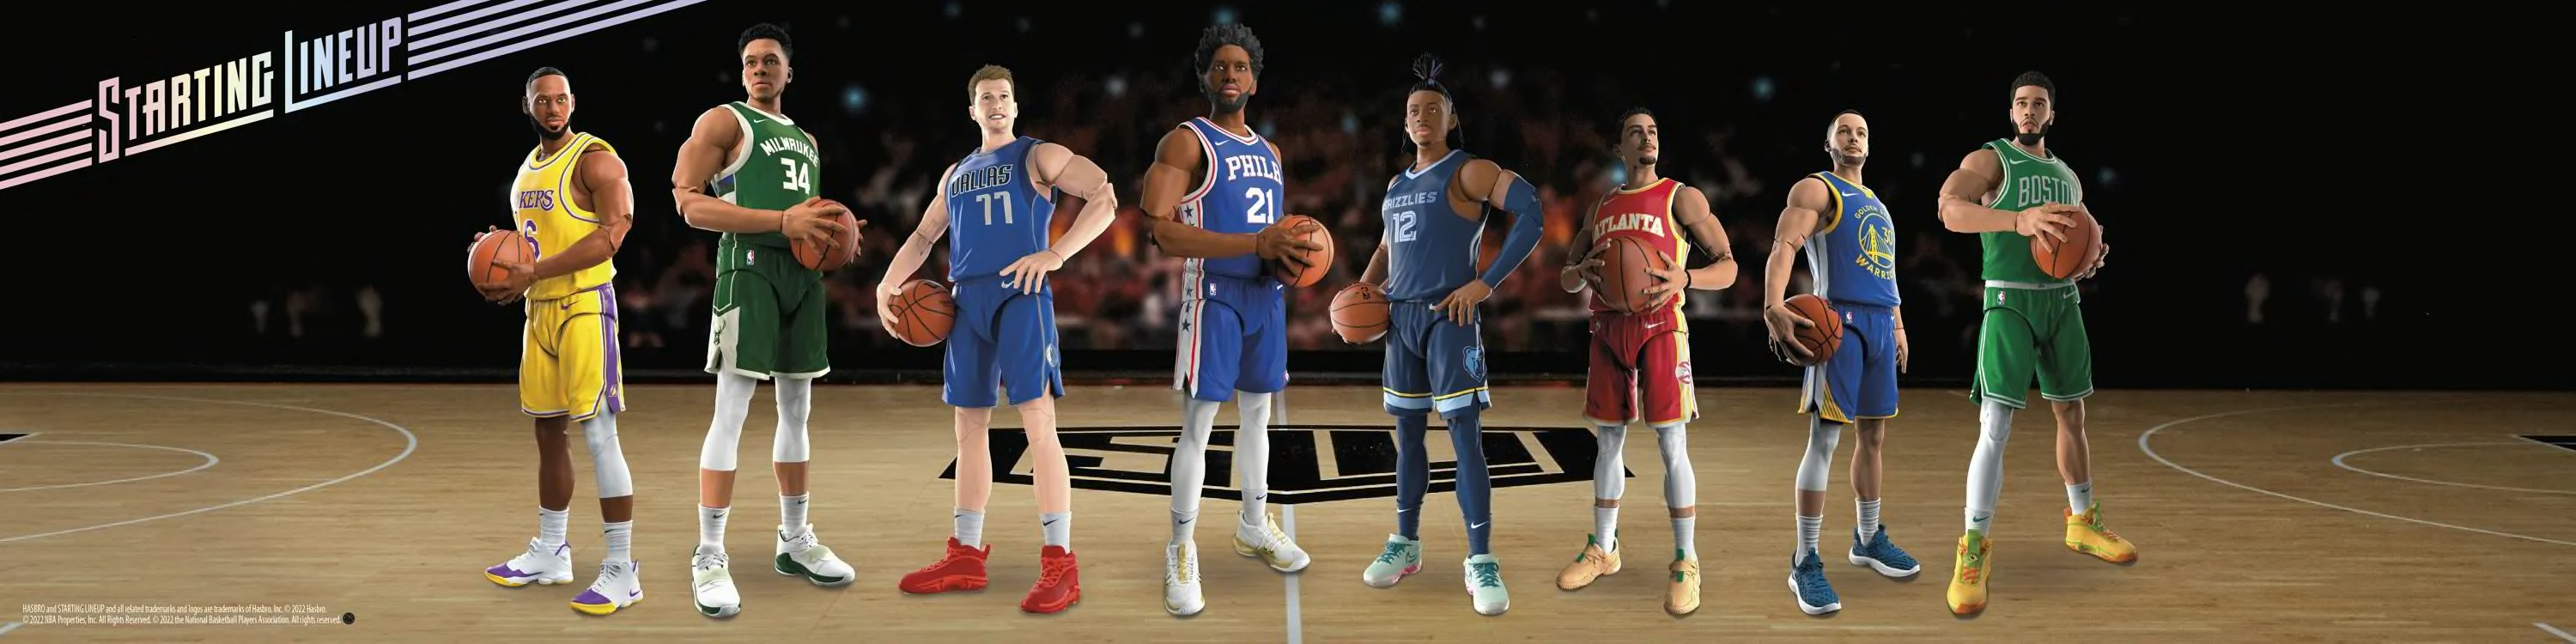 Hasbro NBA Starting Lineup figures available for preorder now